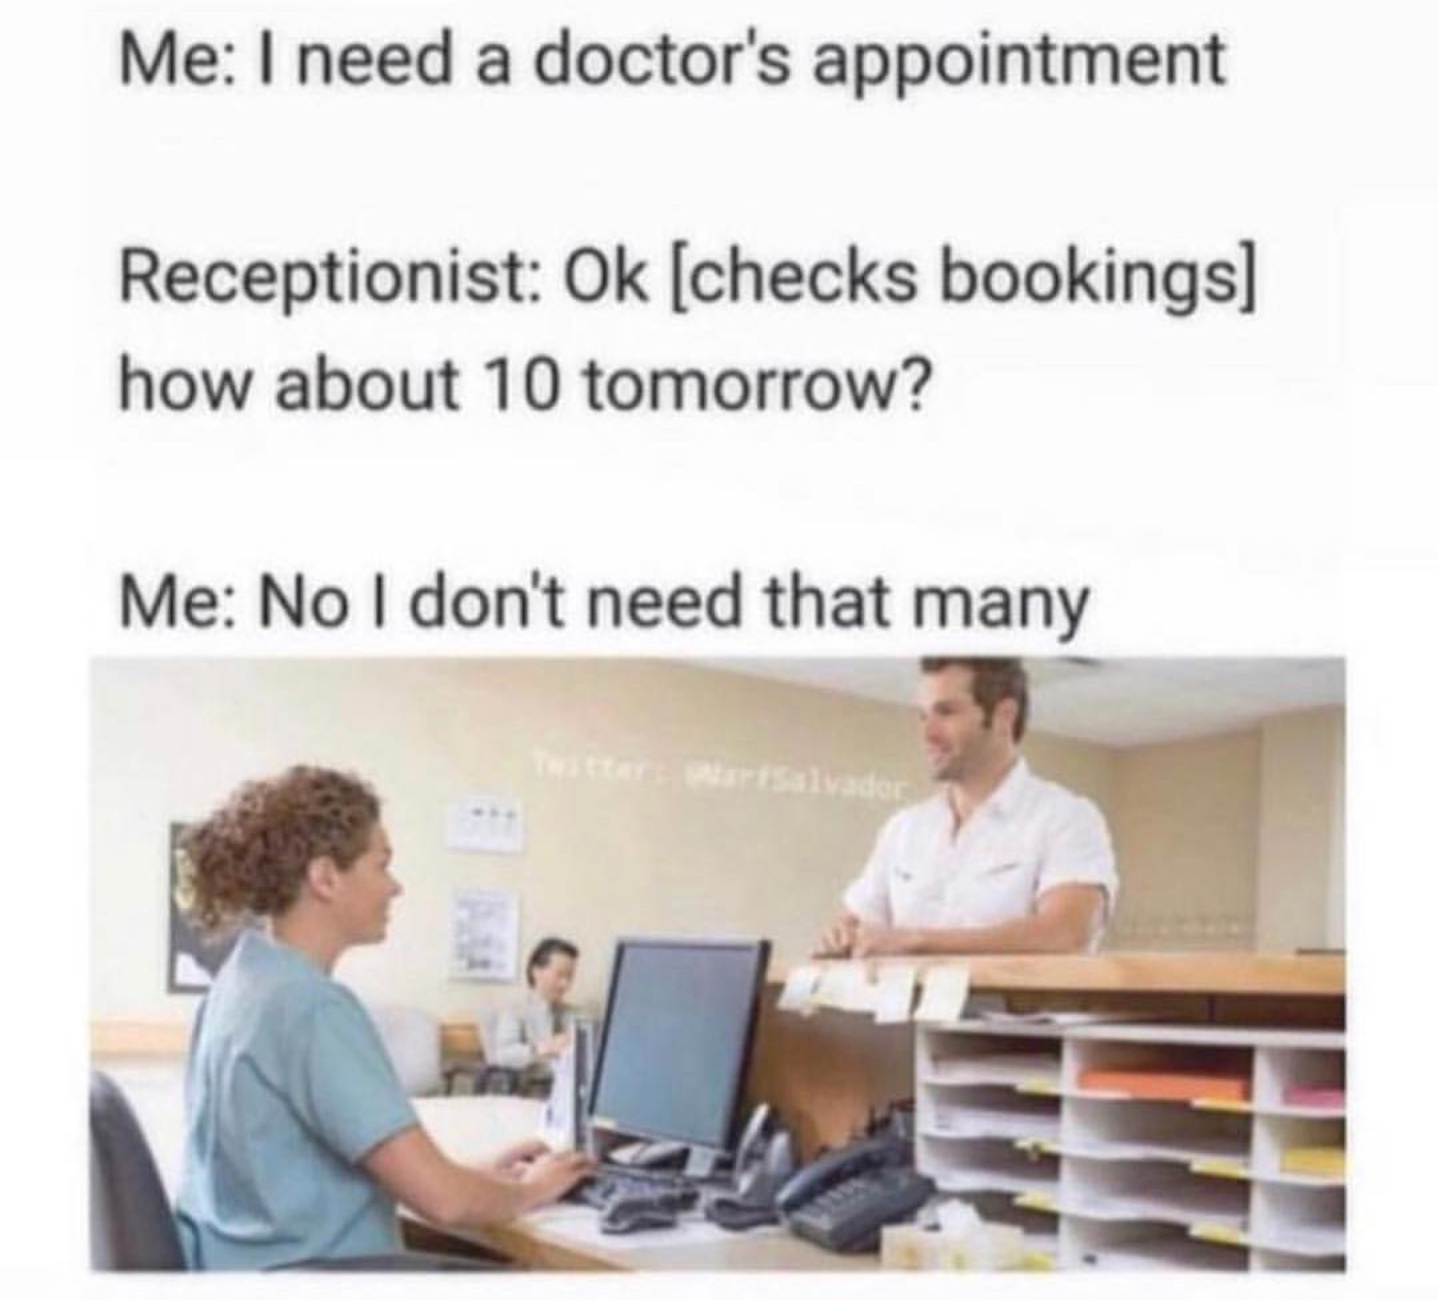 doctor appointment memes - Me I need a doctor's appointment Receptionist Ok checks bookings how about 10 tomorrow? Me No I don't need that many